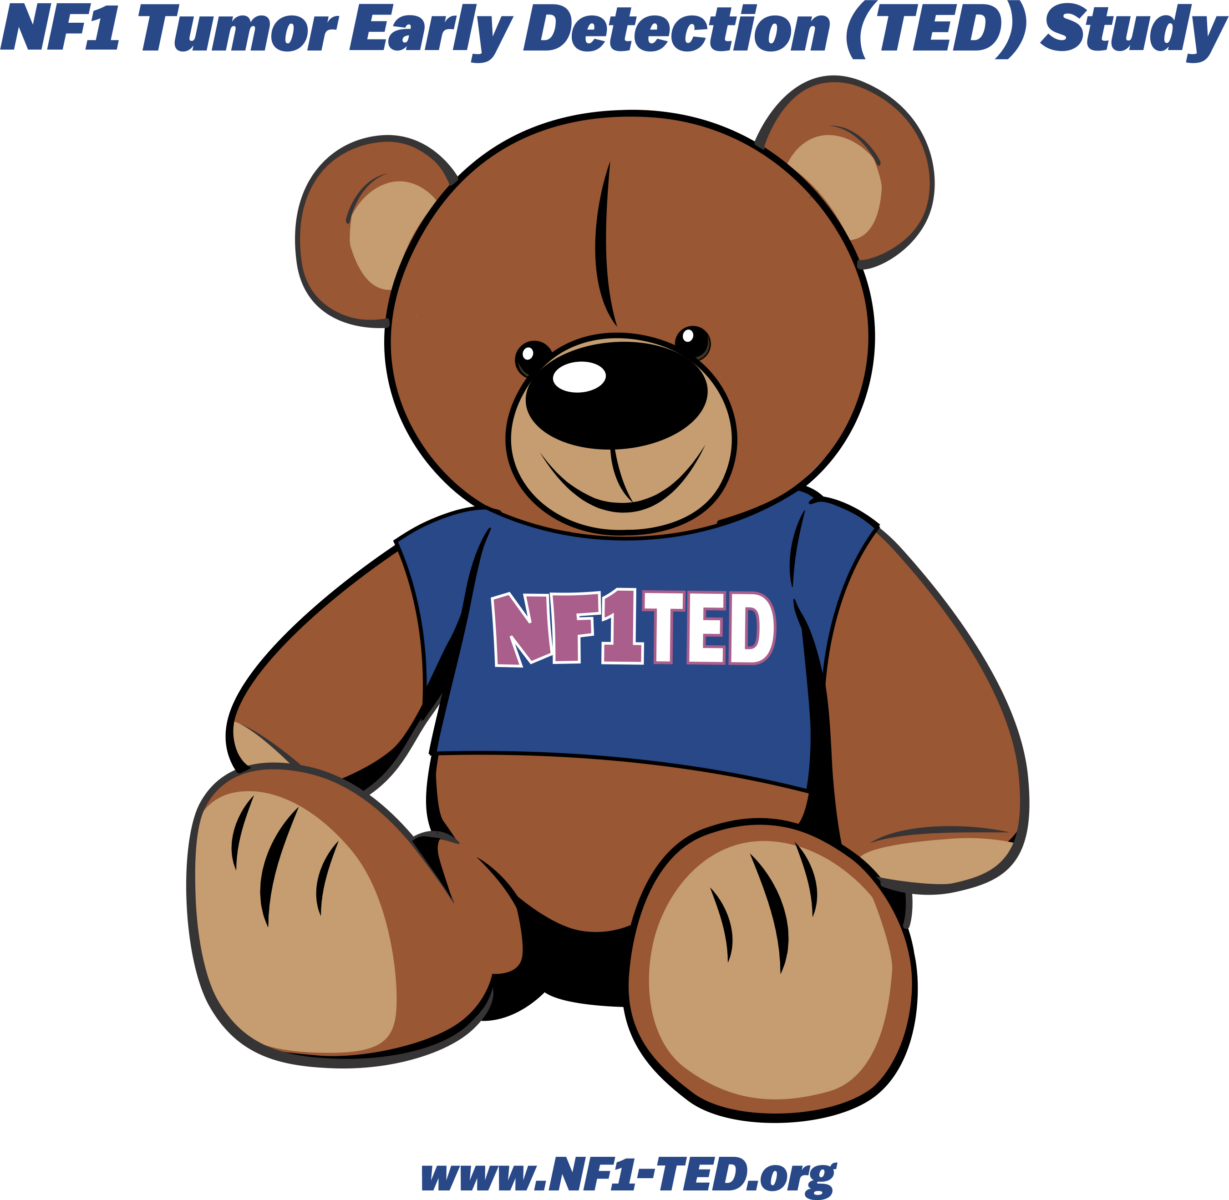 cartoon drawing of teddy bear with "NF1 TED" on it's shirt